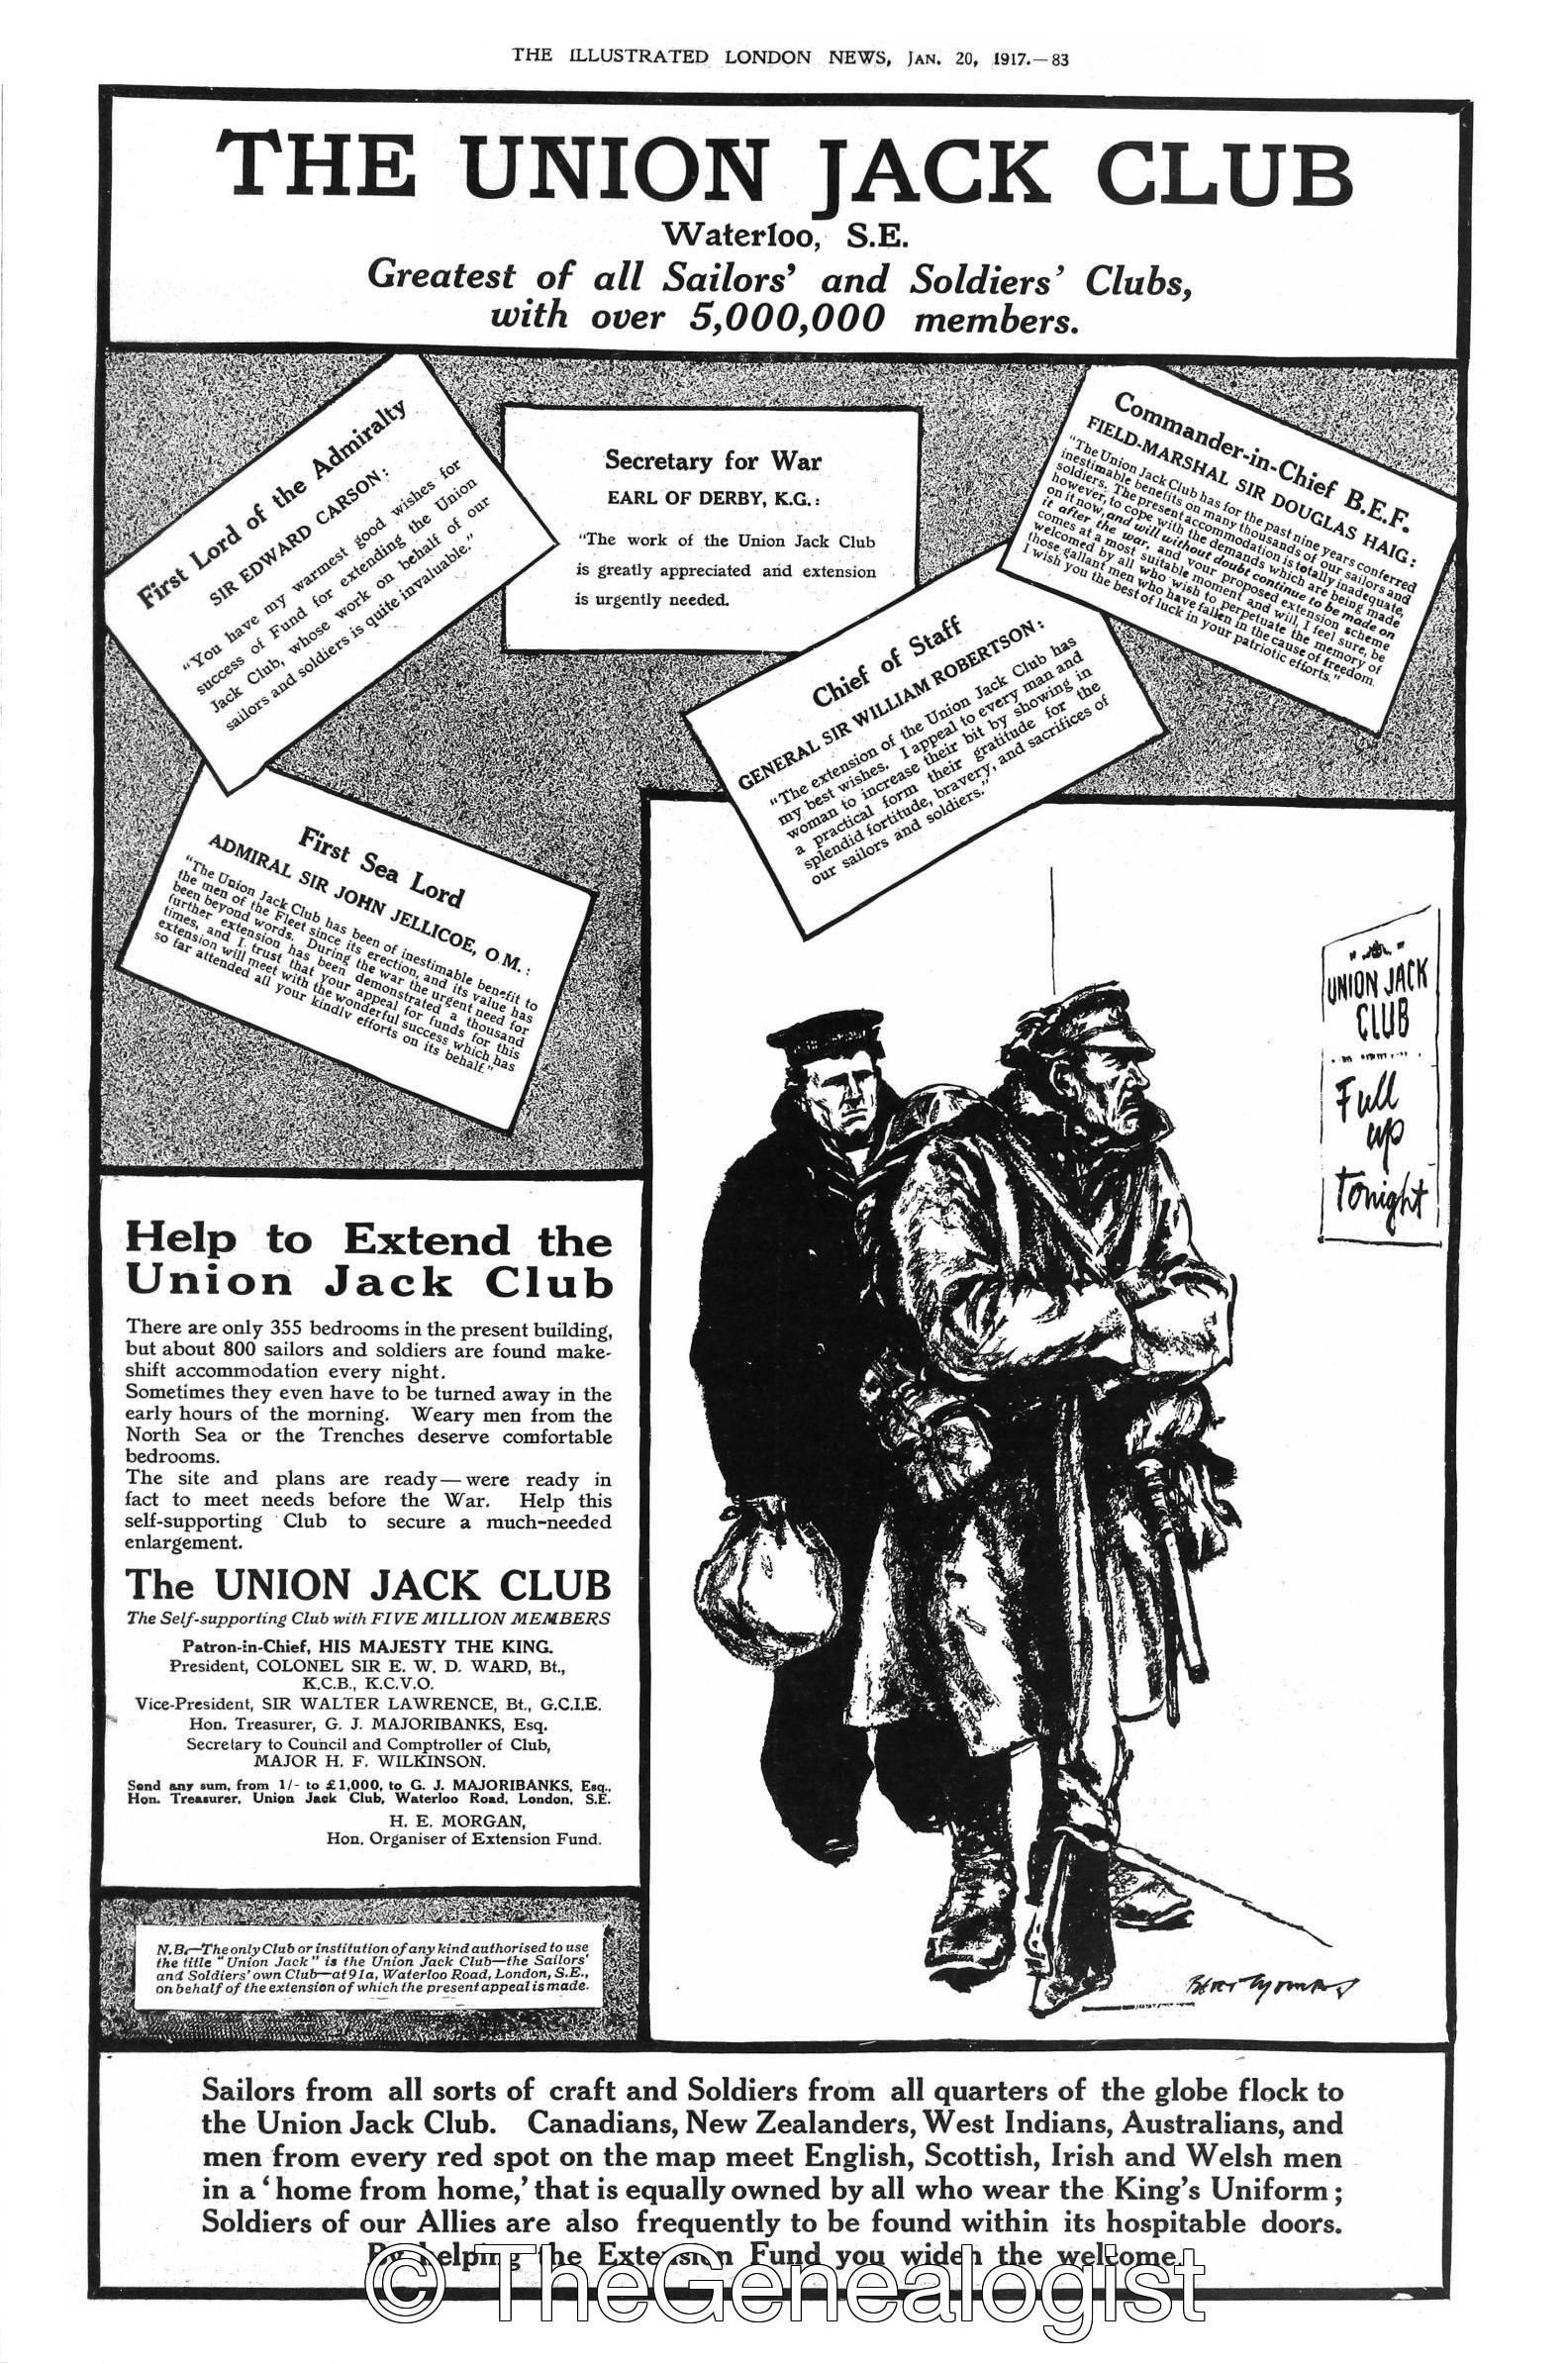 The Illustrated London News January 20, 1917 from TheGenealogist's Newspapers and Magazines